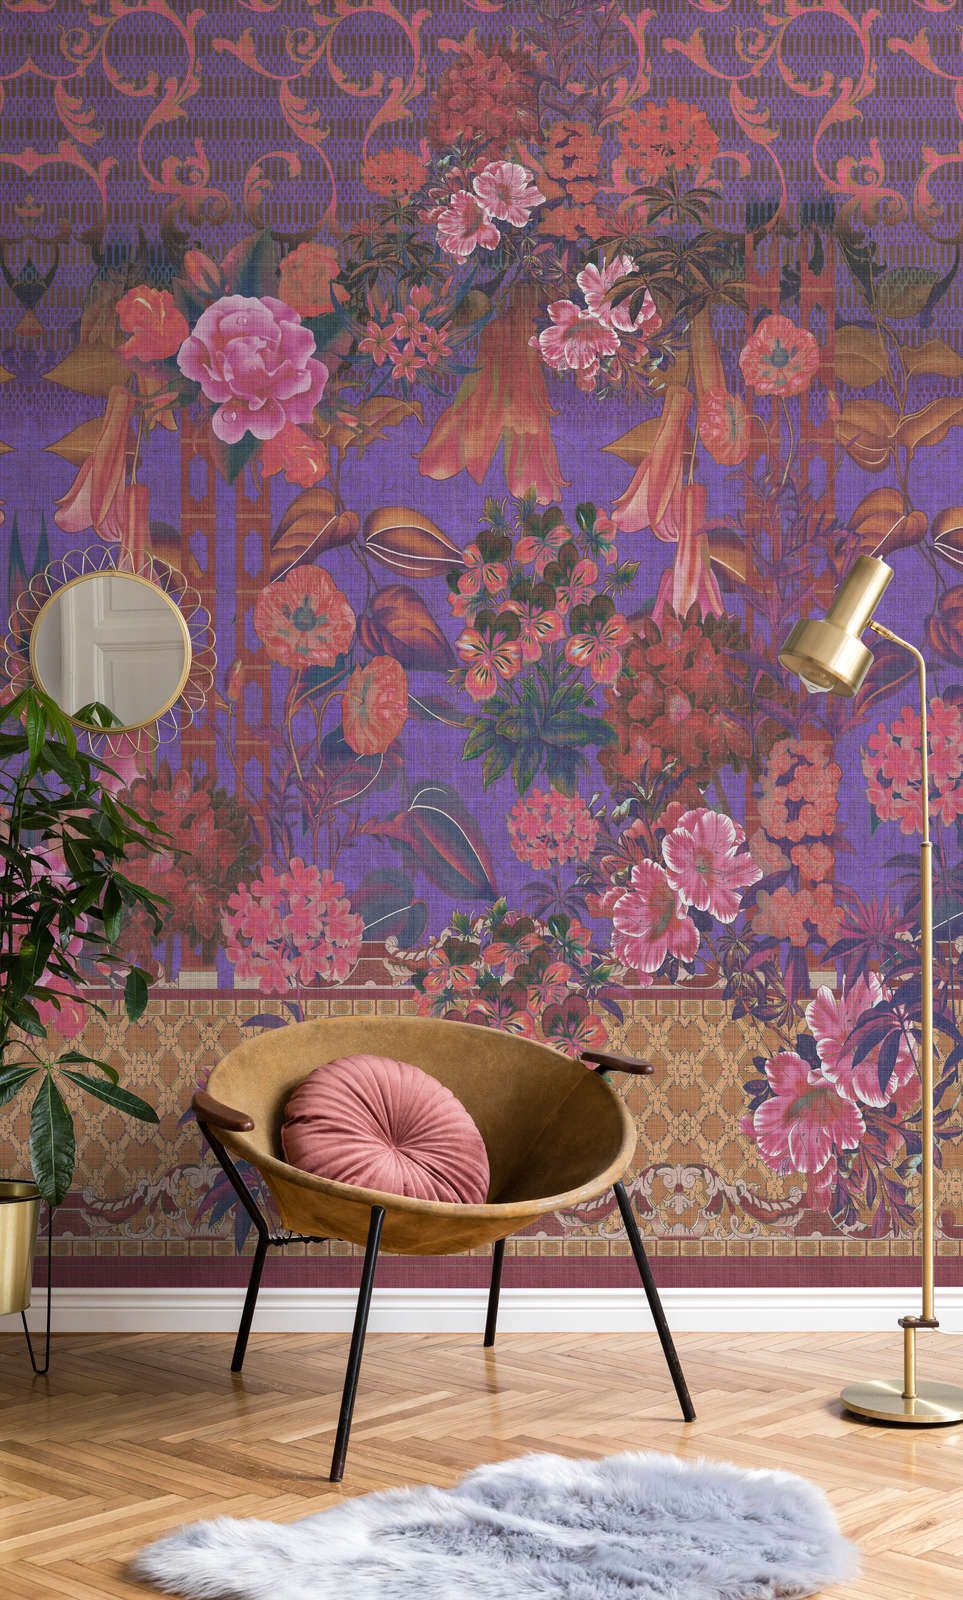             Photo wallpaper »sati 1« - Floral design with linen structure look - Purple | Lightly textured non-woven
        